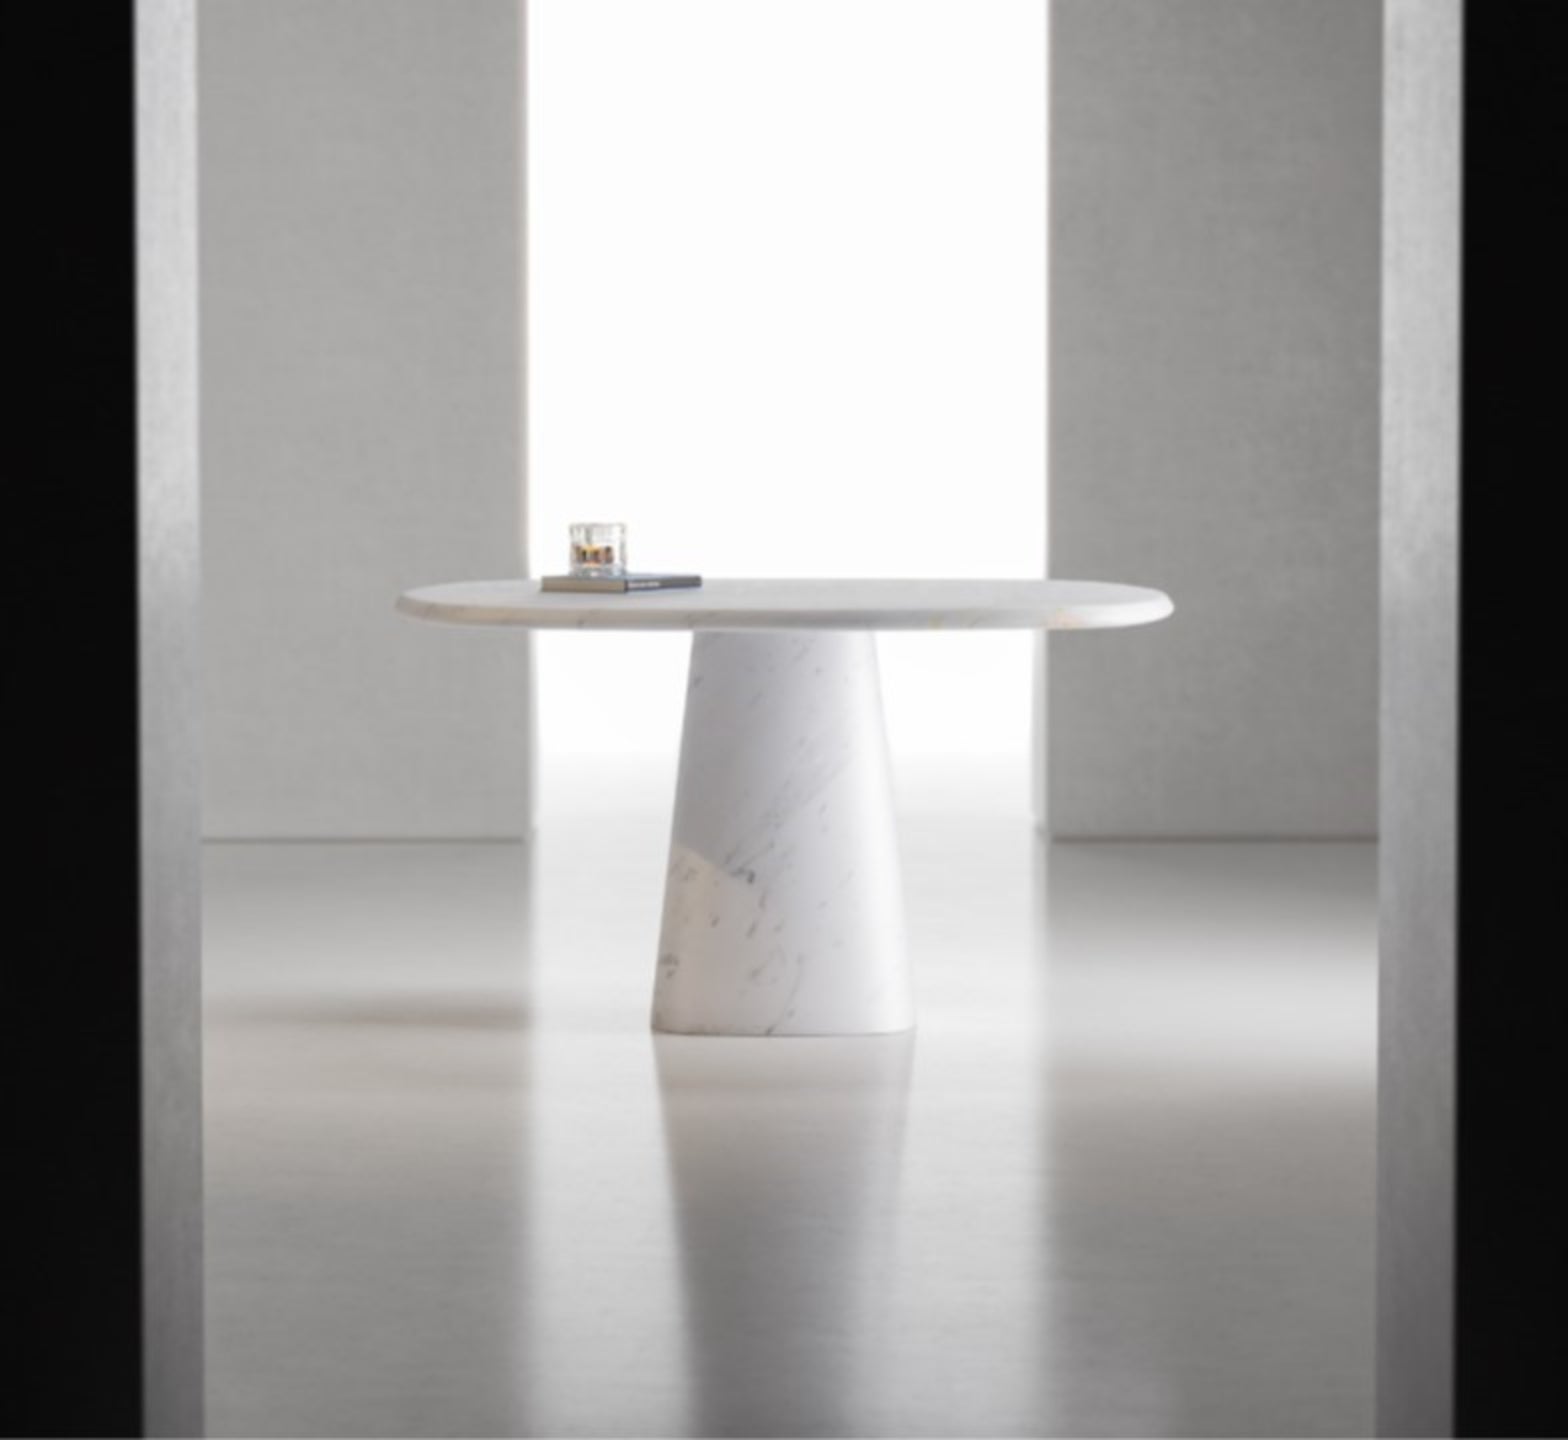 Kilknos Wedge Table by Marmi Serafini
Materials: Kilknos marble.
Dimensions: D 130 x H 75 cm
Other marbles available (prices may vary): Kilknos, Travertino Silver, Rosso Francia, Calacatta Macchia Vecchia.


Marmi Serafini is located in a small city